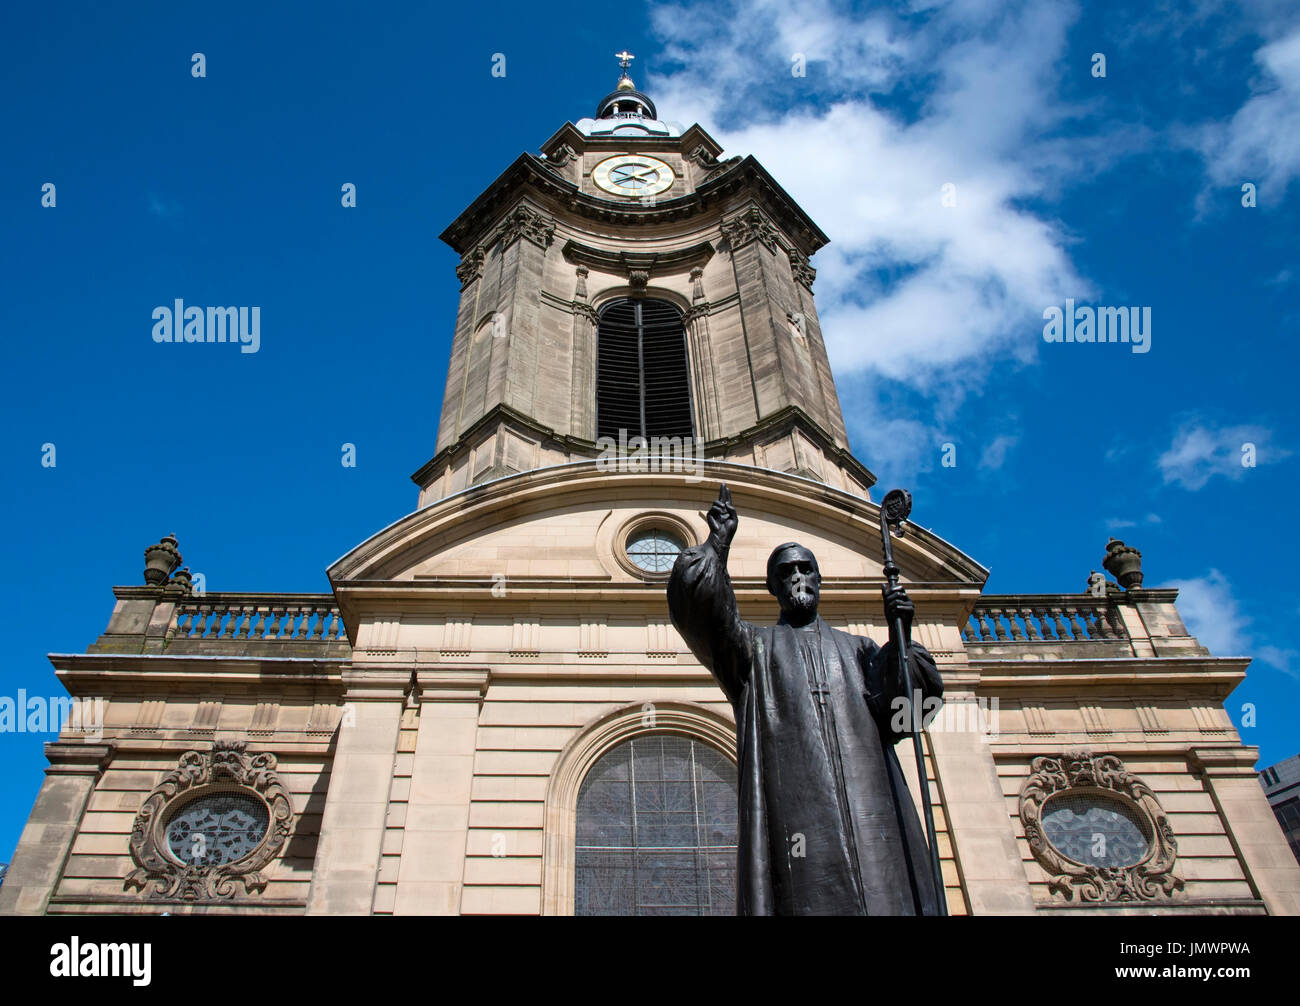 The bronze statue of Charles Gore, 1st Bishop of Birmingham stand outside St. Phlip's Cathedal, Birmingham, West Midlands, England, Europe Stock Photo